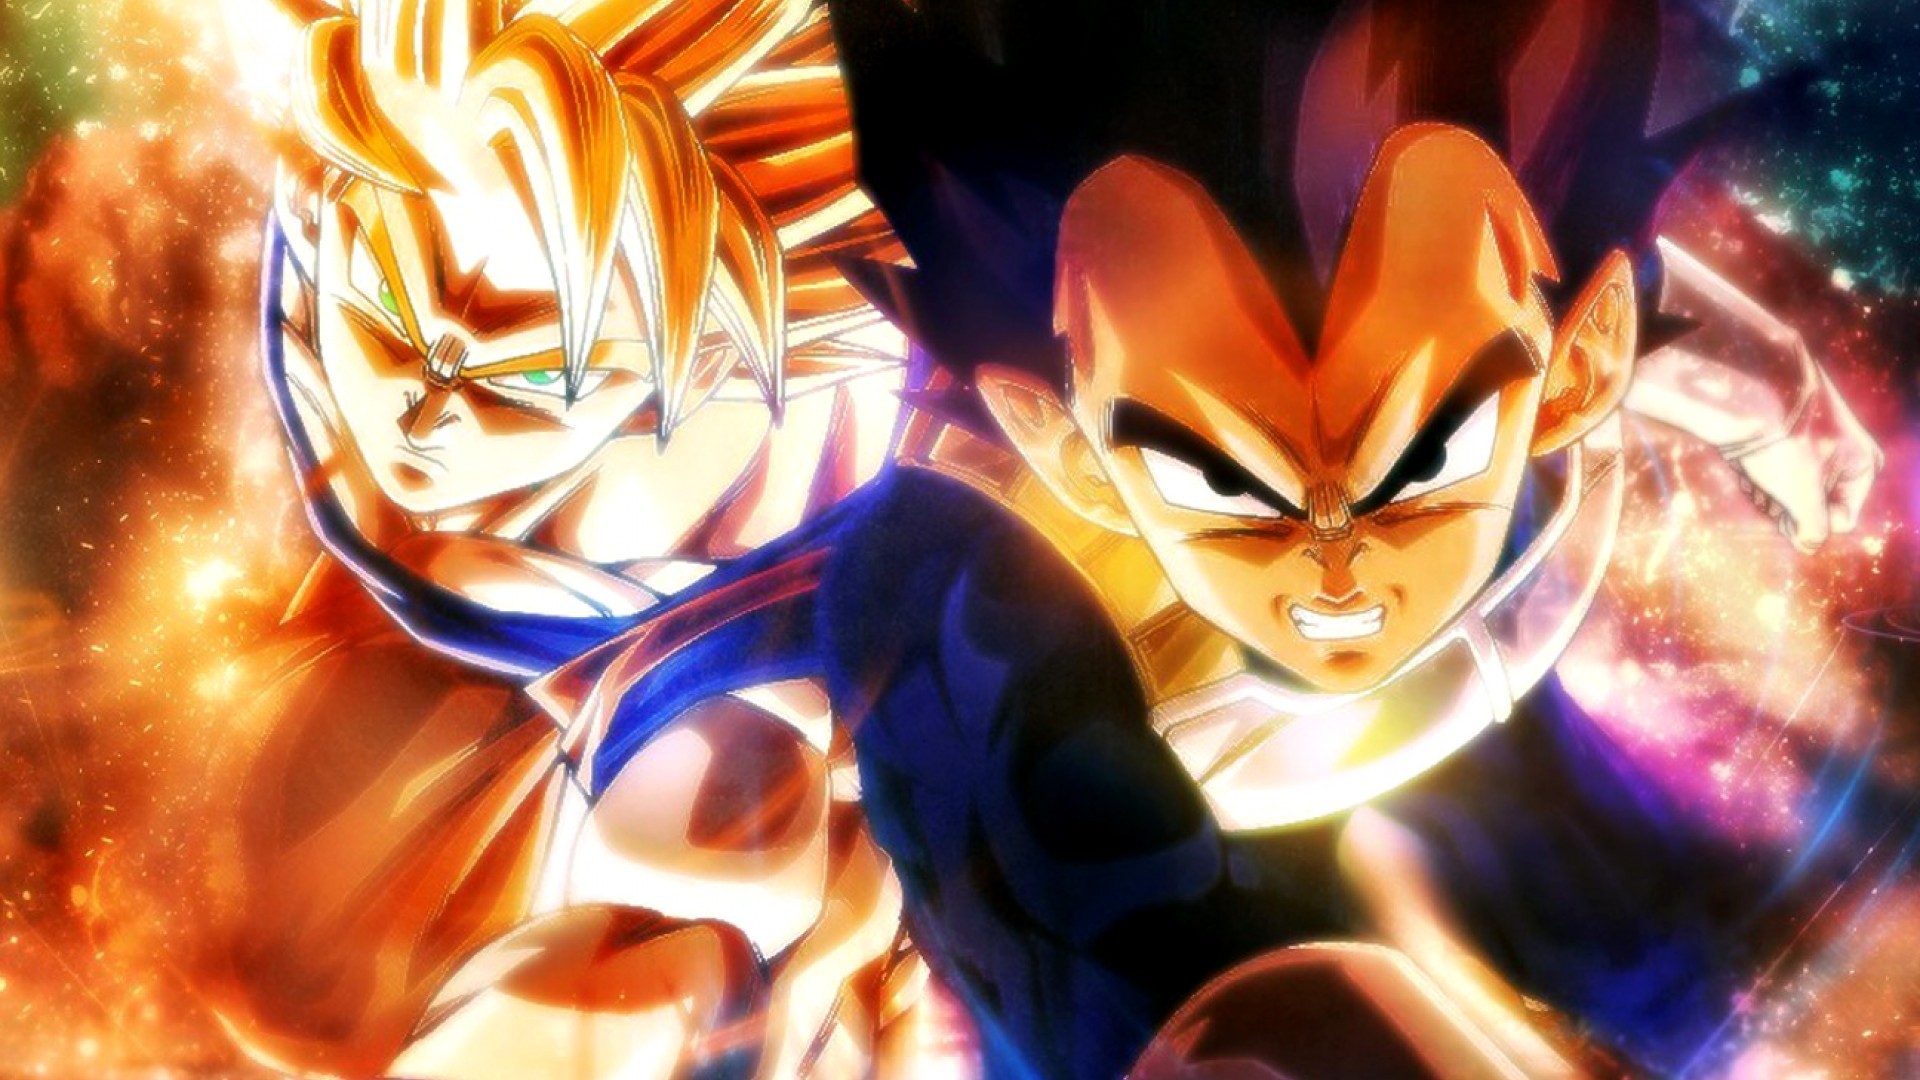 Goku Super Saiyan HD Wallpaper with image resolution 1920x1080 pixel. You can make this wallpaper for your Desktop Computer Backgrounds, Mac Wallpapers, Android Lock screen or iPhone Screensavers